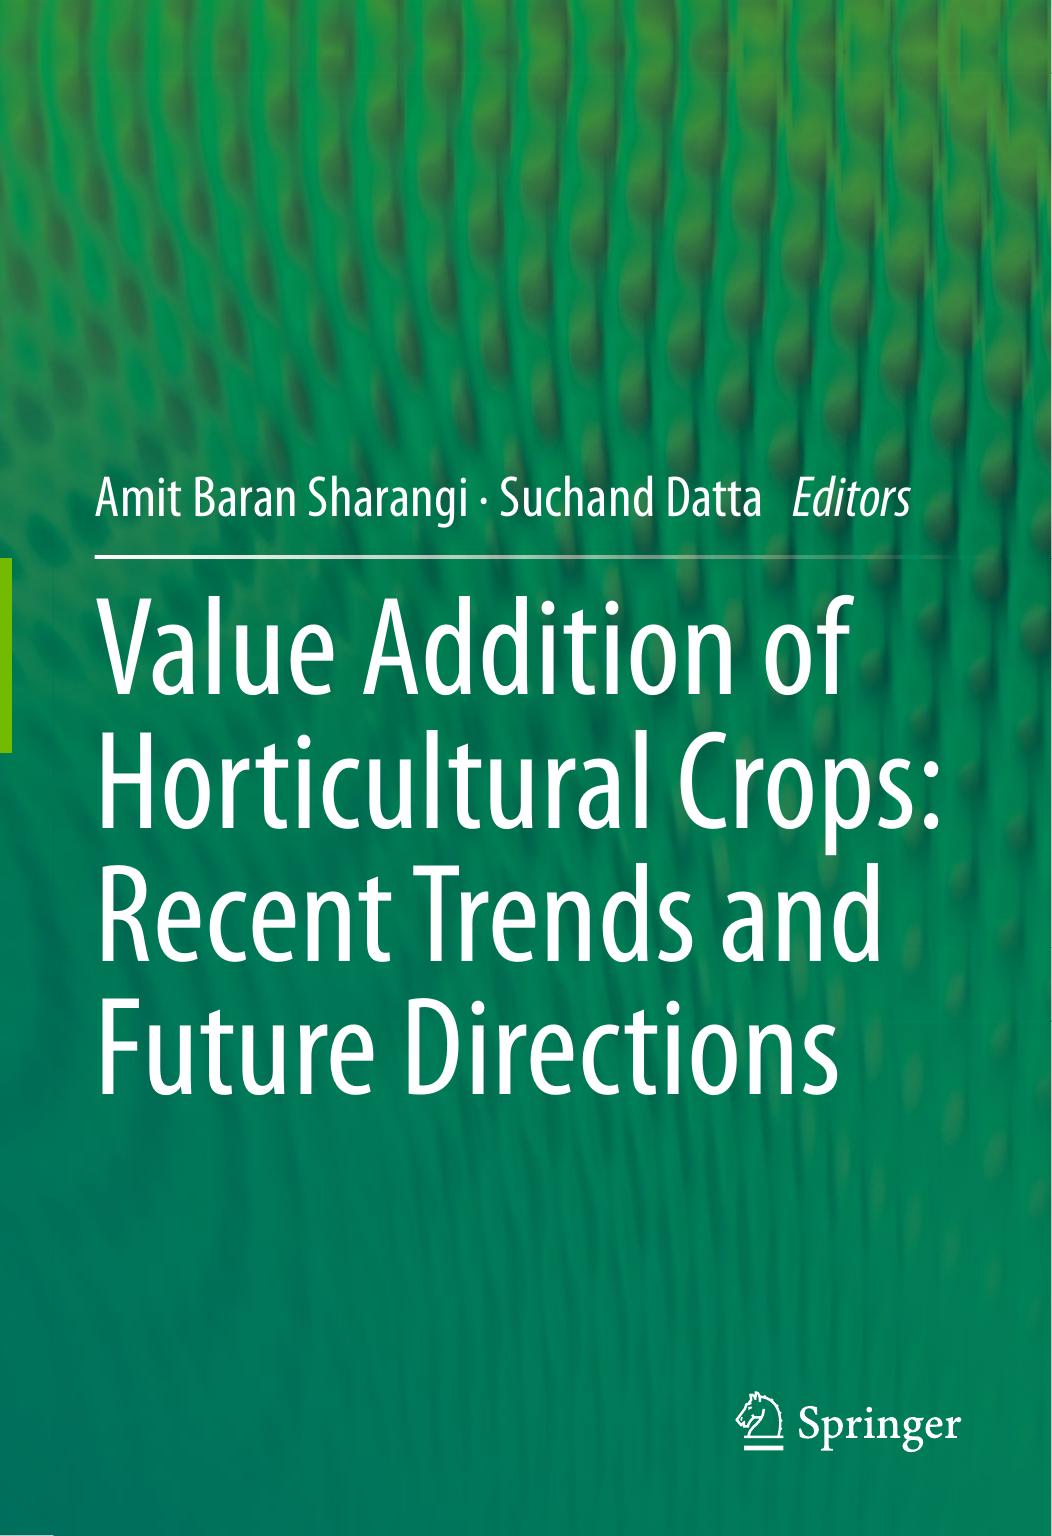 Value Addition of Horticultural Crops  Recent Trends and Future Directions ( PDFDrive ), 2015